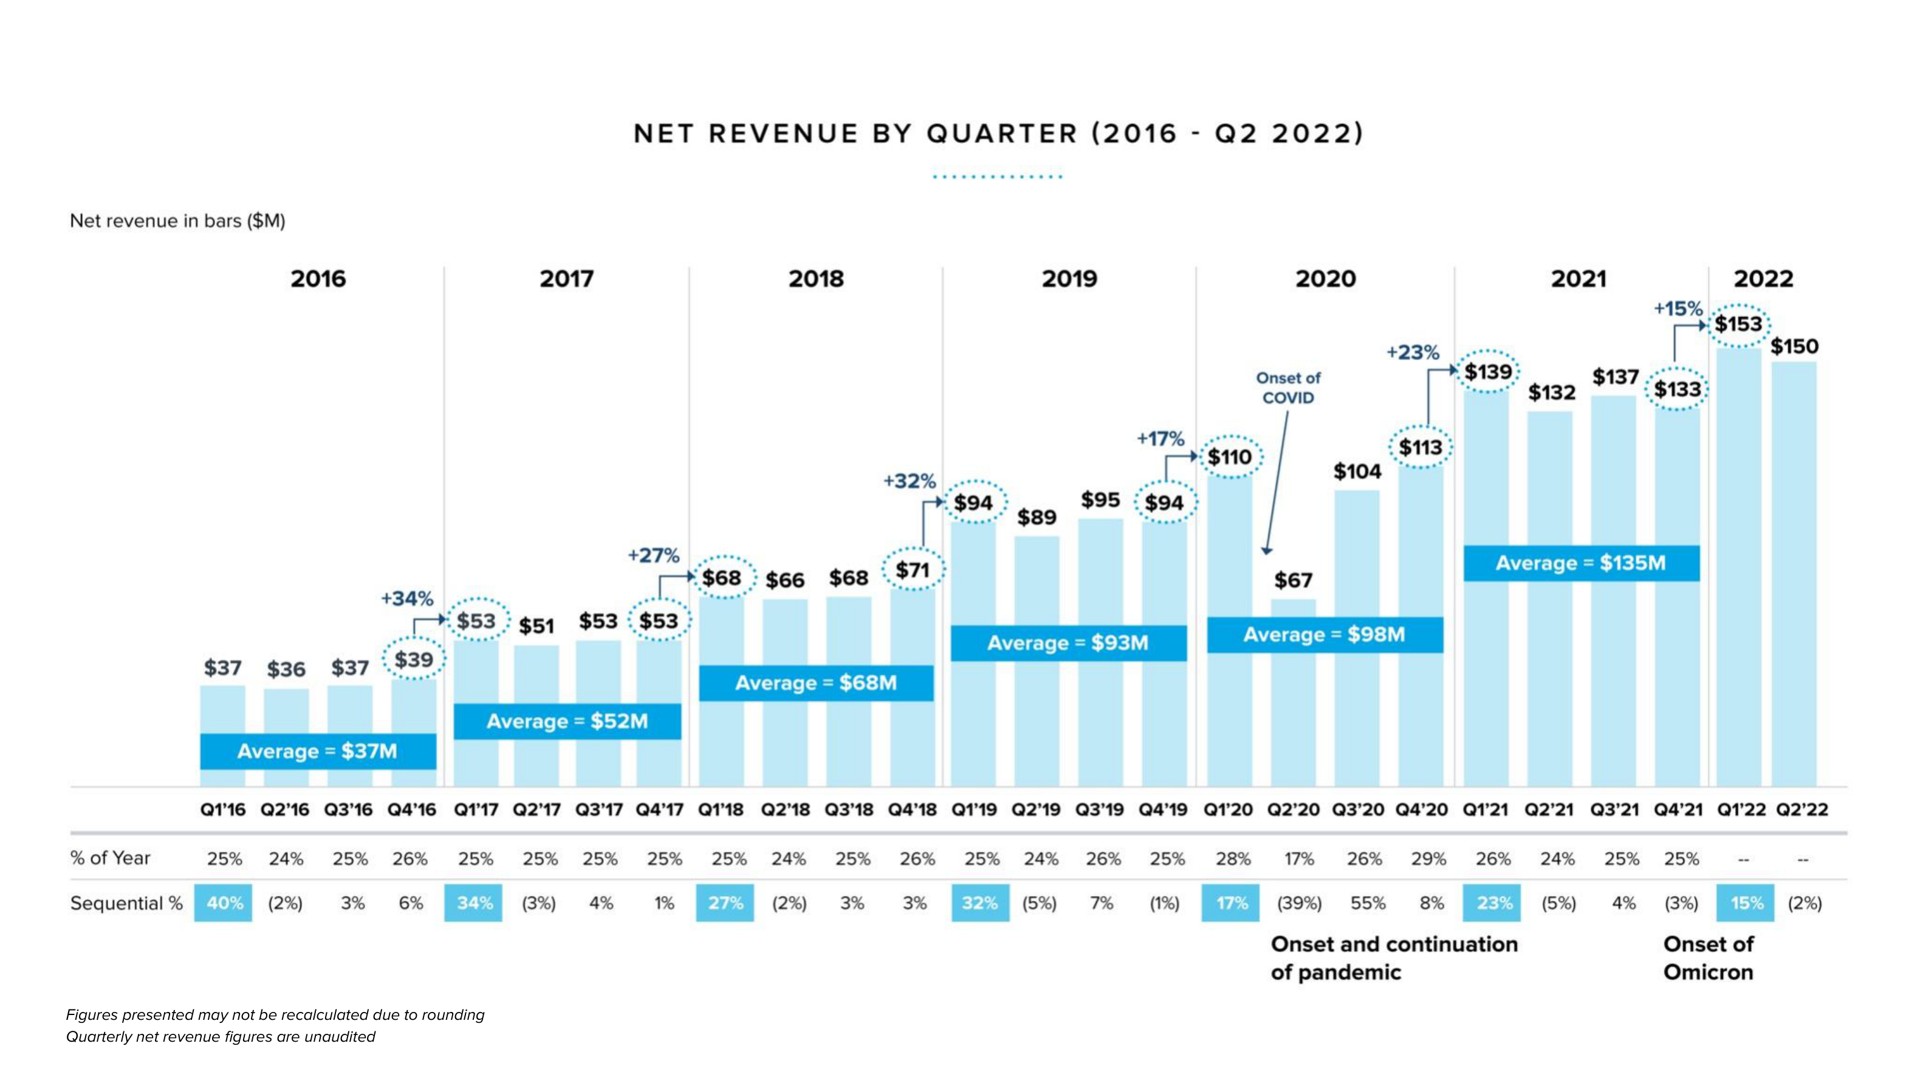 net revenue by quarter net revenue in bars gee ces cond sits i tae sob average average average average average of year sequential onset and continuation of pandemic onset of omicron | Warby Parker